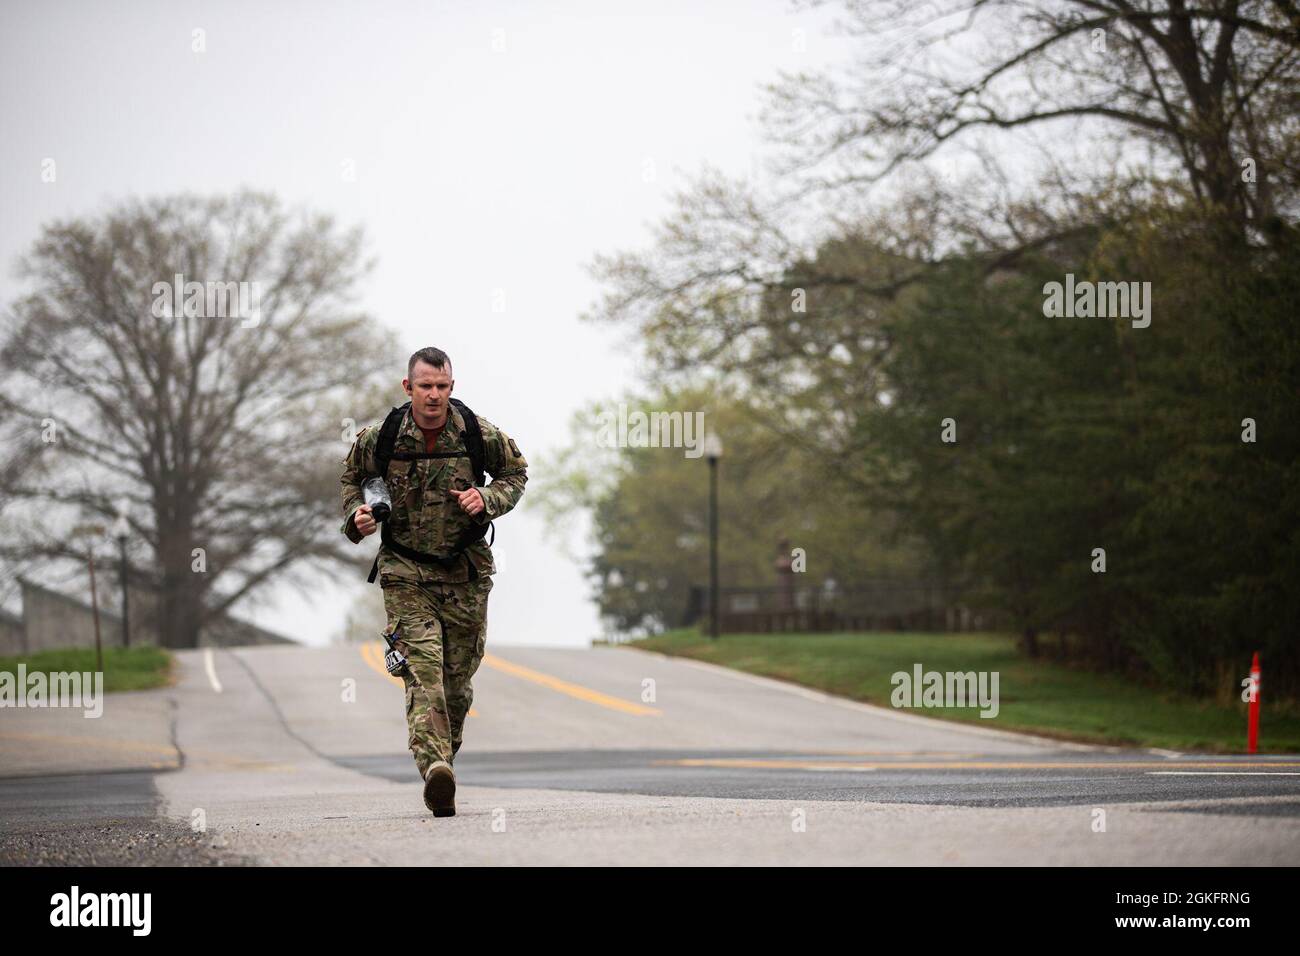 U.S. Army Sgt. 1st Class Nicholas Waddell, assigned to 55th Signal Company (Combat Camera) conduct the 26-mile Bataan Memorial Death March on Fort George G. Meade, Maryland, April 10, 2021. The Bataan Death March took place in April 1942, where American and Filipino prisoners of war were forced to walk 66 miles. Stock Photo